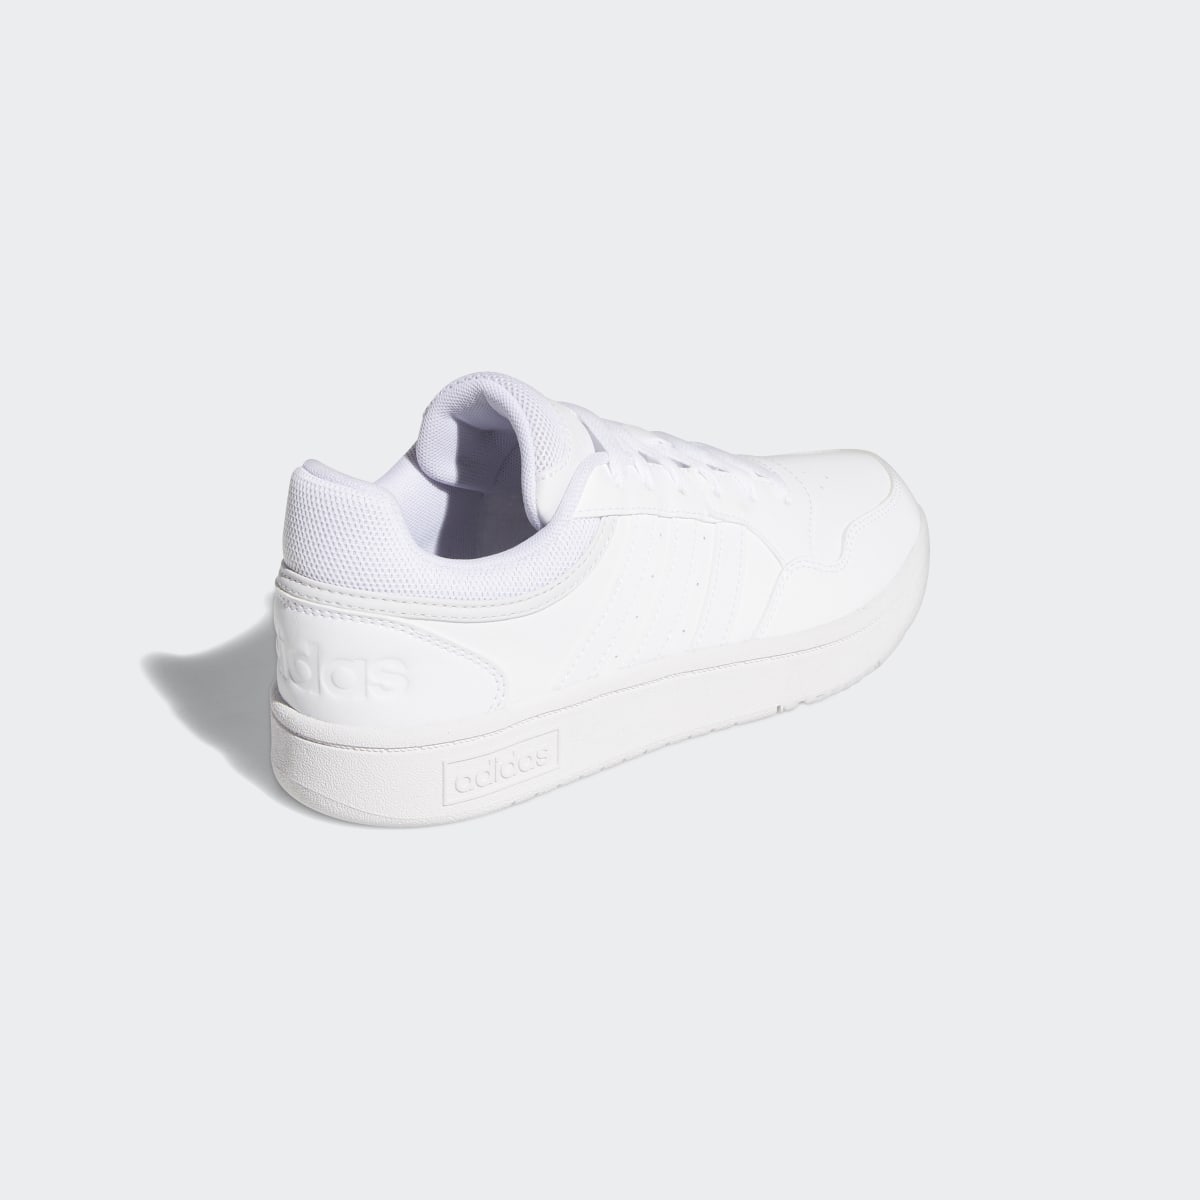 Adidas Hoops 3.0 Low Classic Schuh. 8